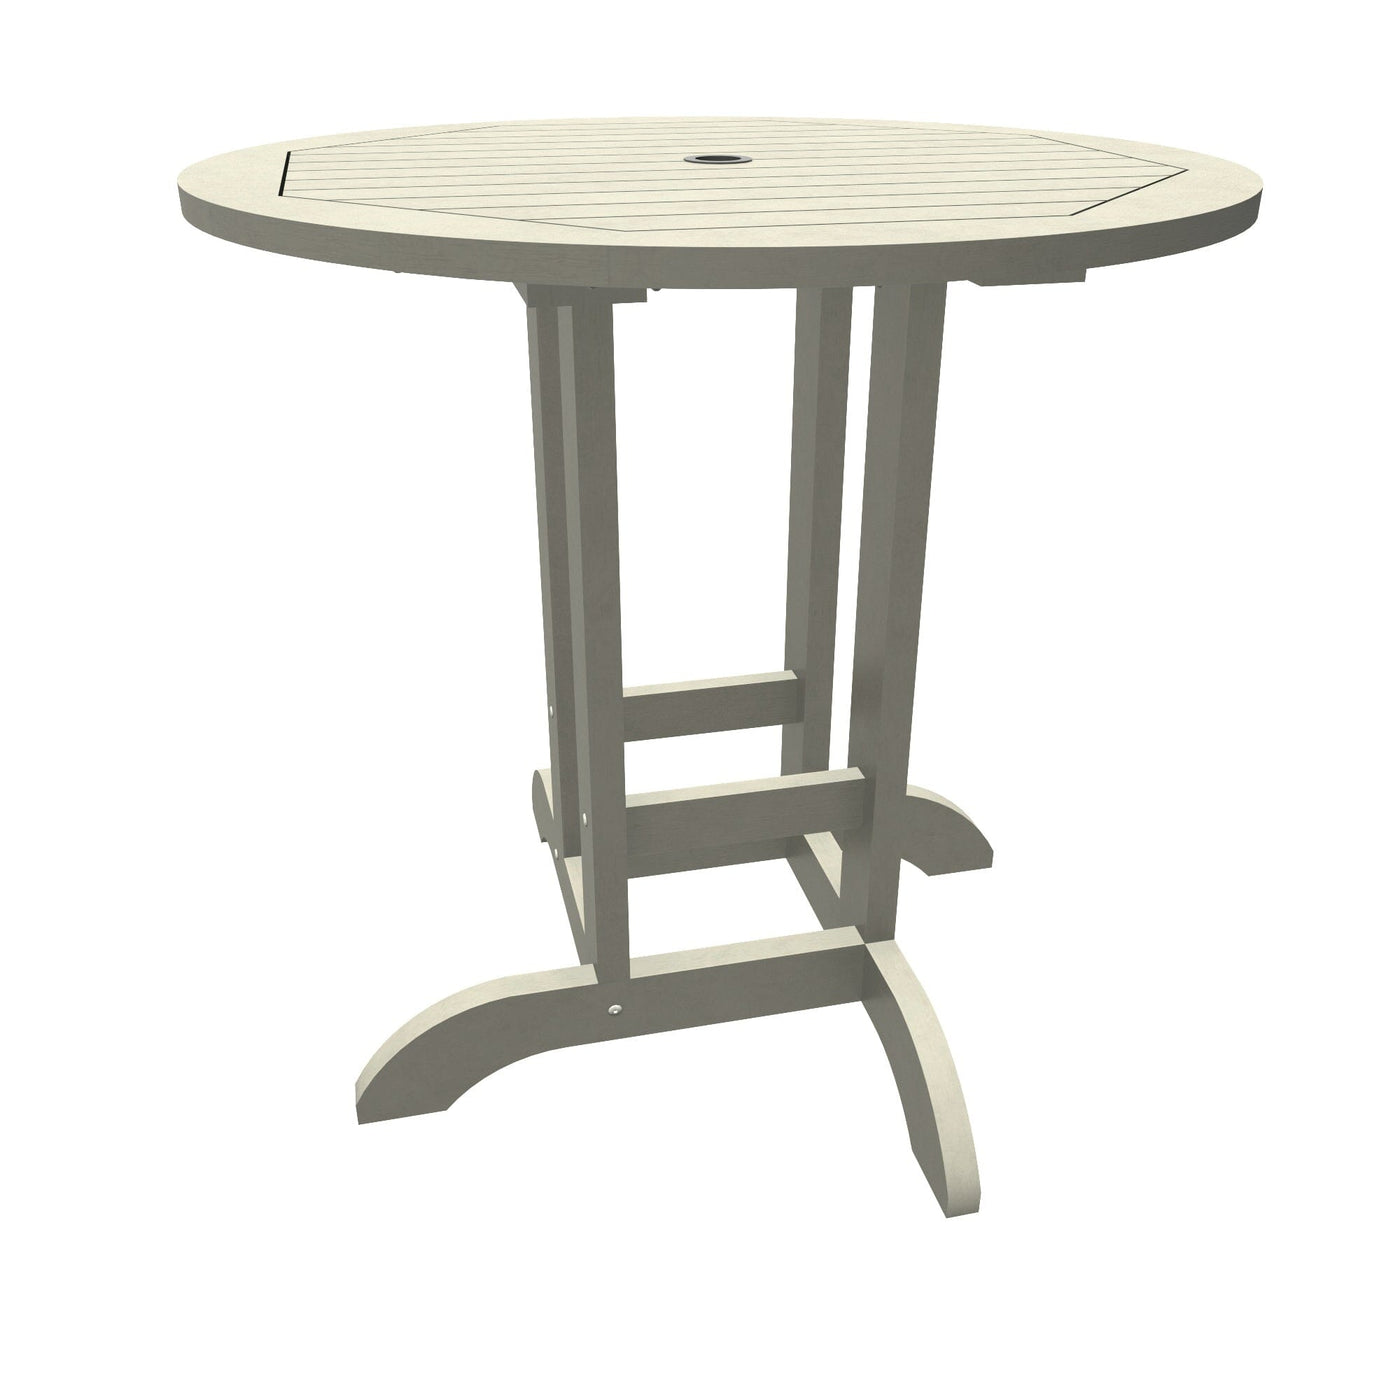 Round 36in Diameter Dining Table - Counter Height Dining Highwood USA Harbor Gray 